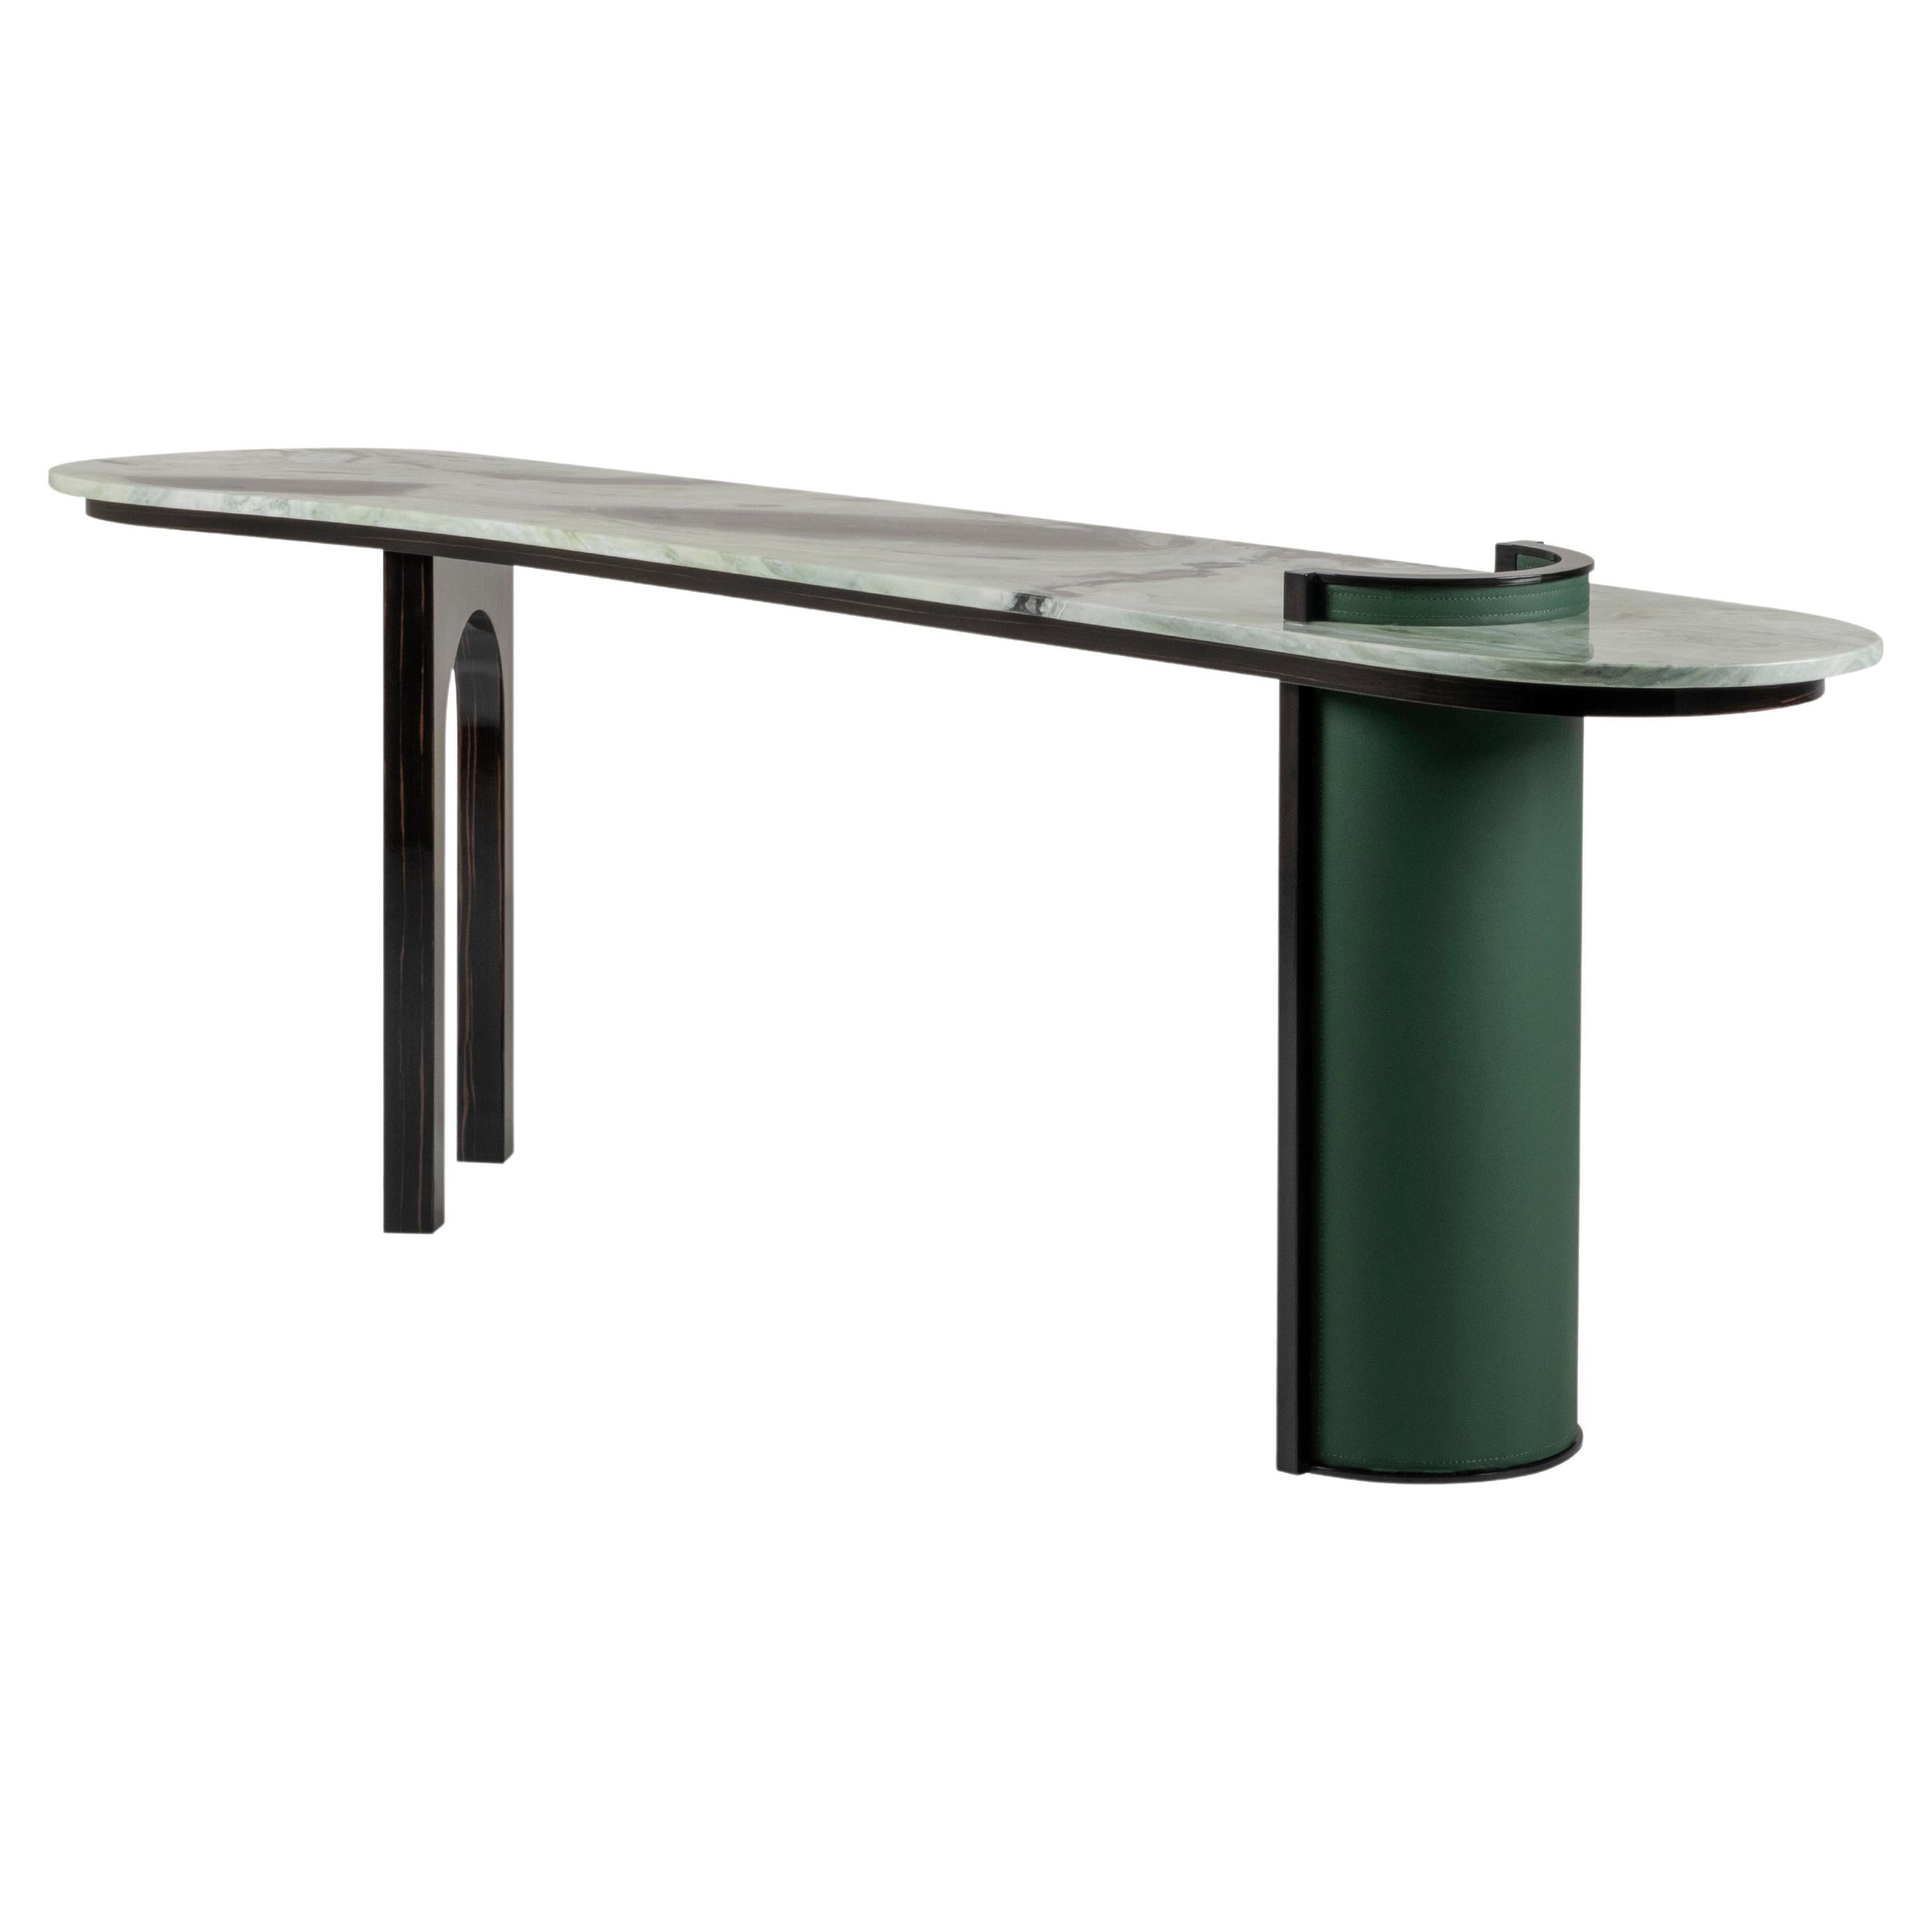 21st Century Modern Chiado Console Handcrafted in Portugal by Greenapple